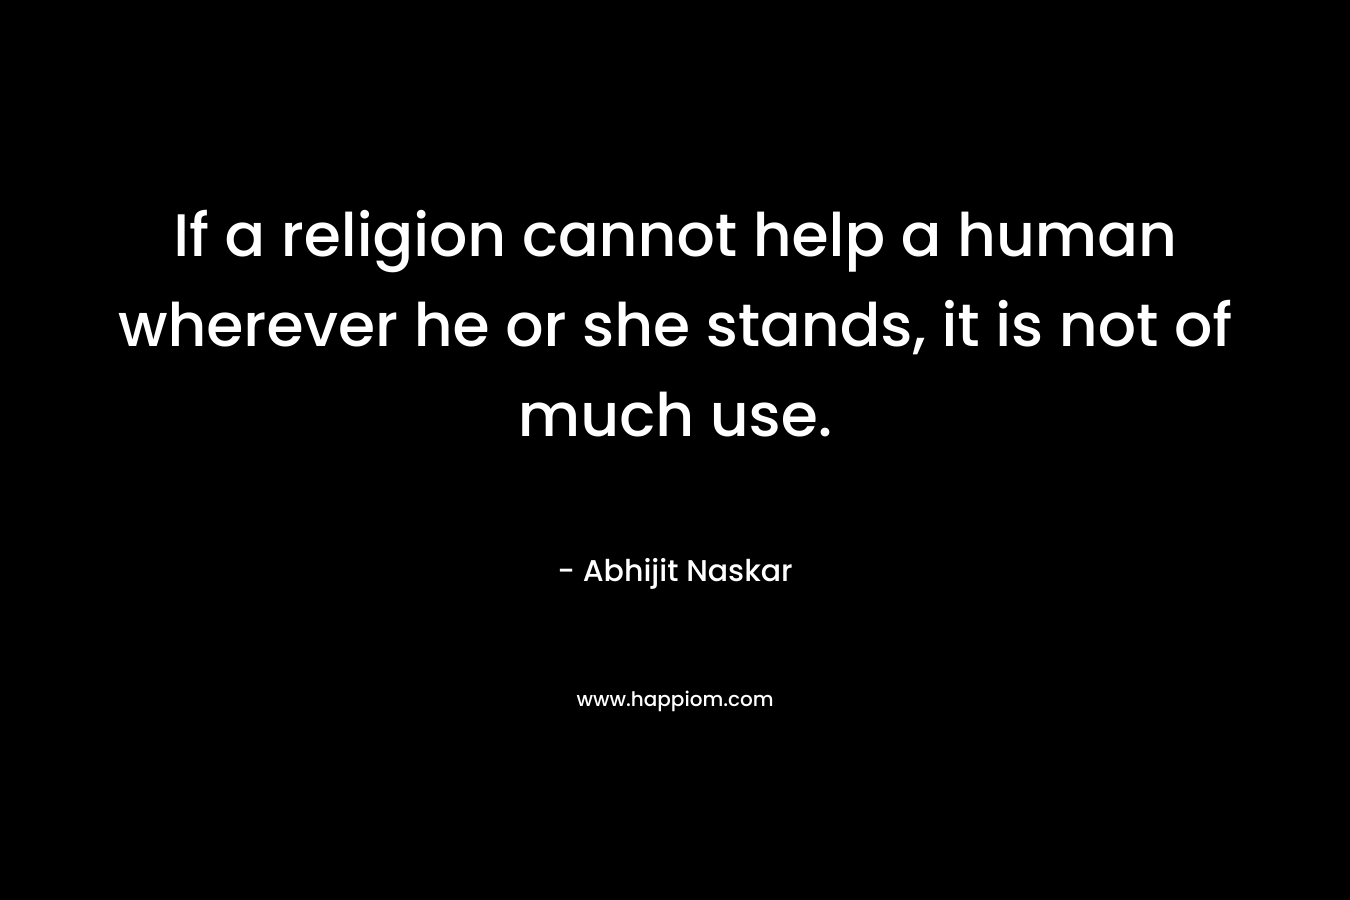 If a religion cannot help a human wherever he or she stands, it is not of much use.